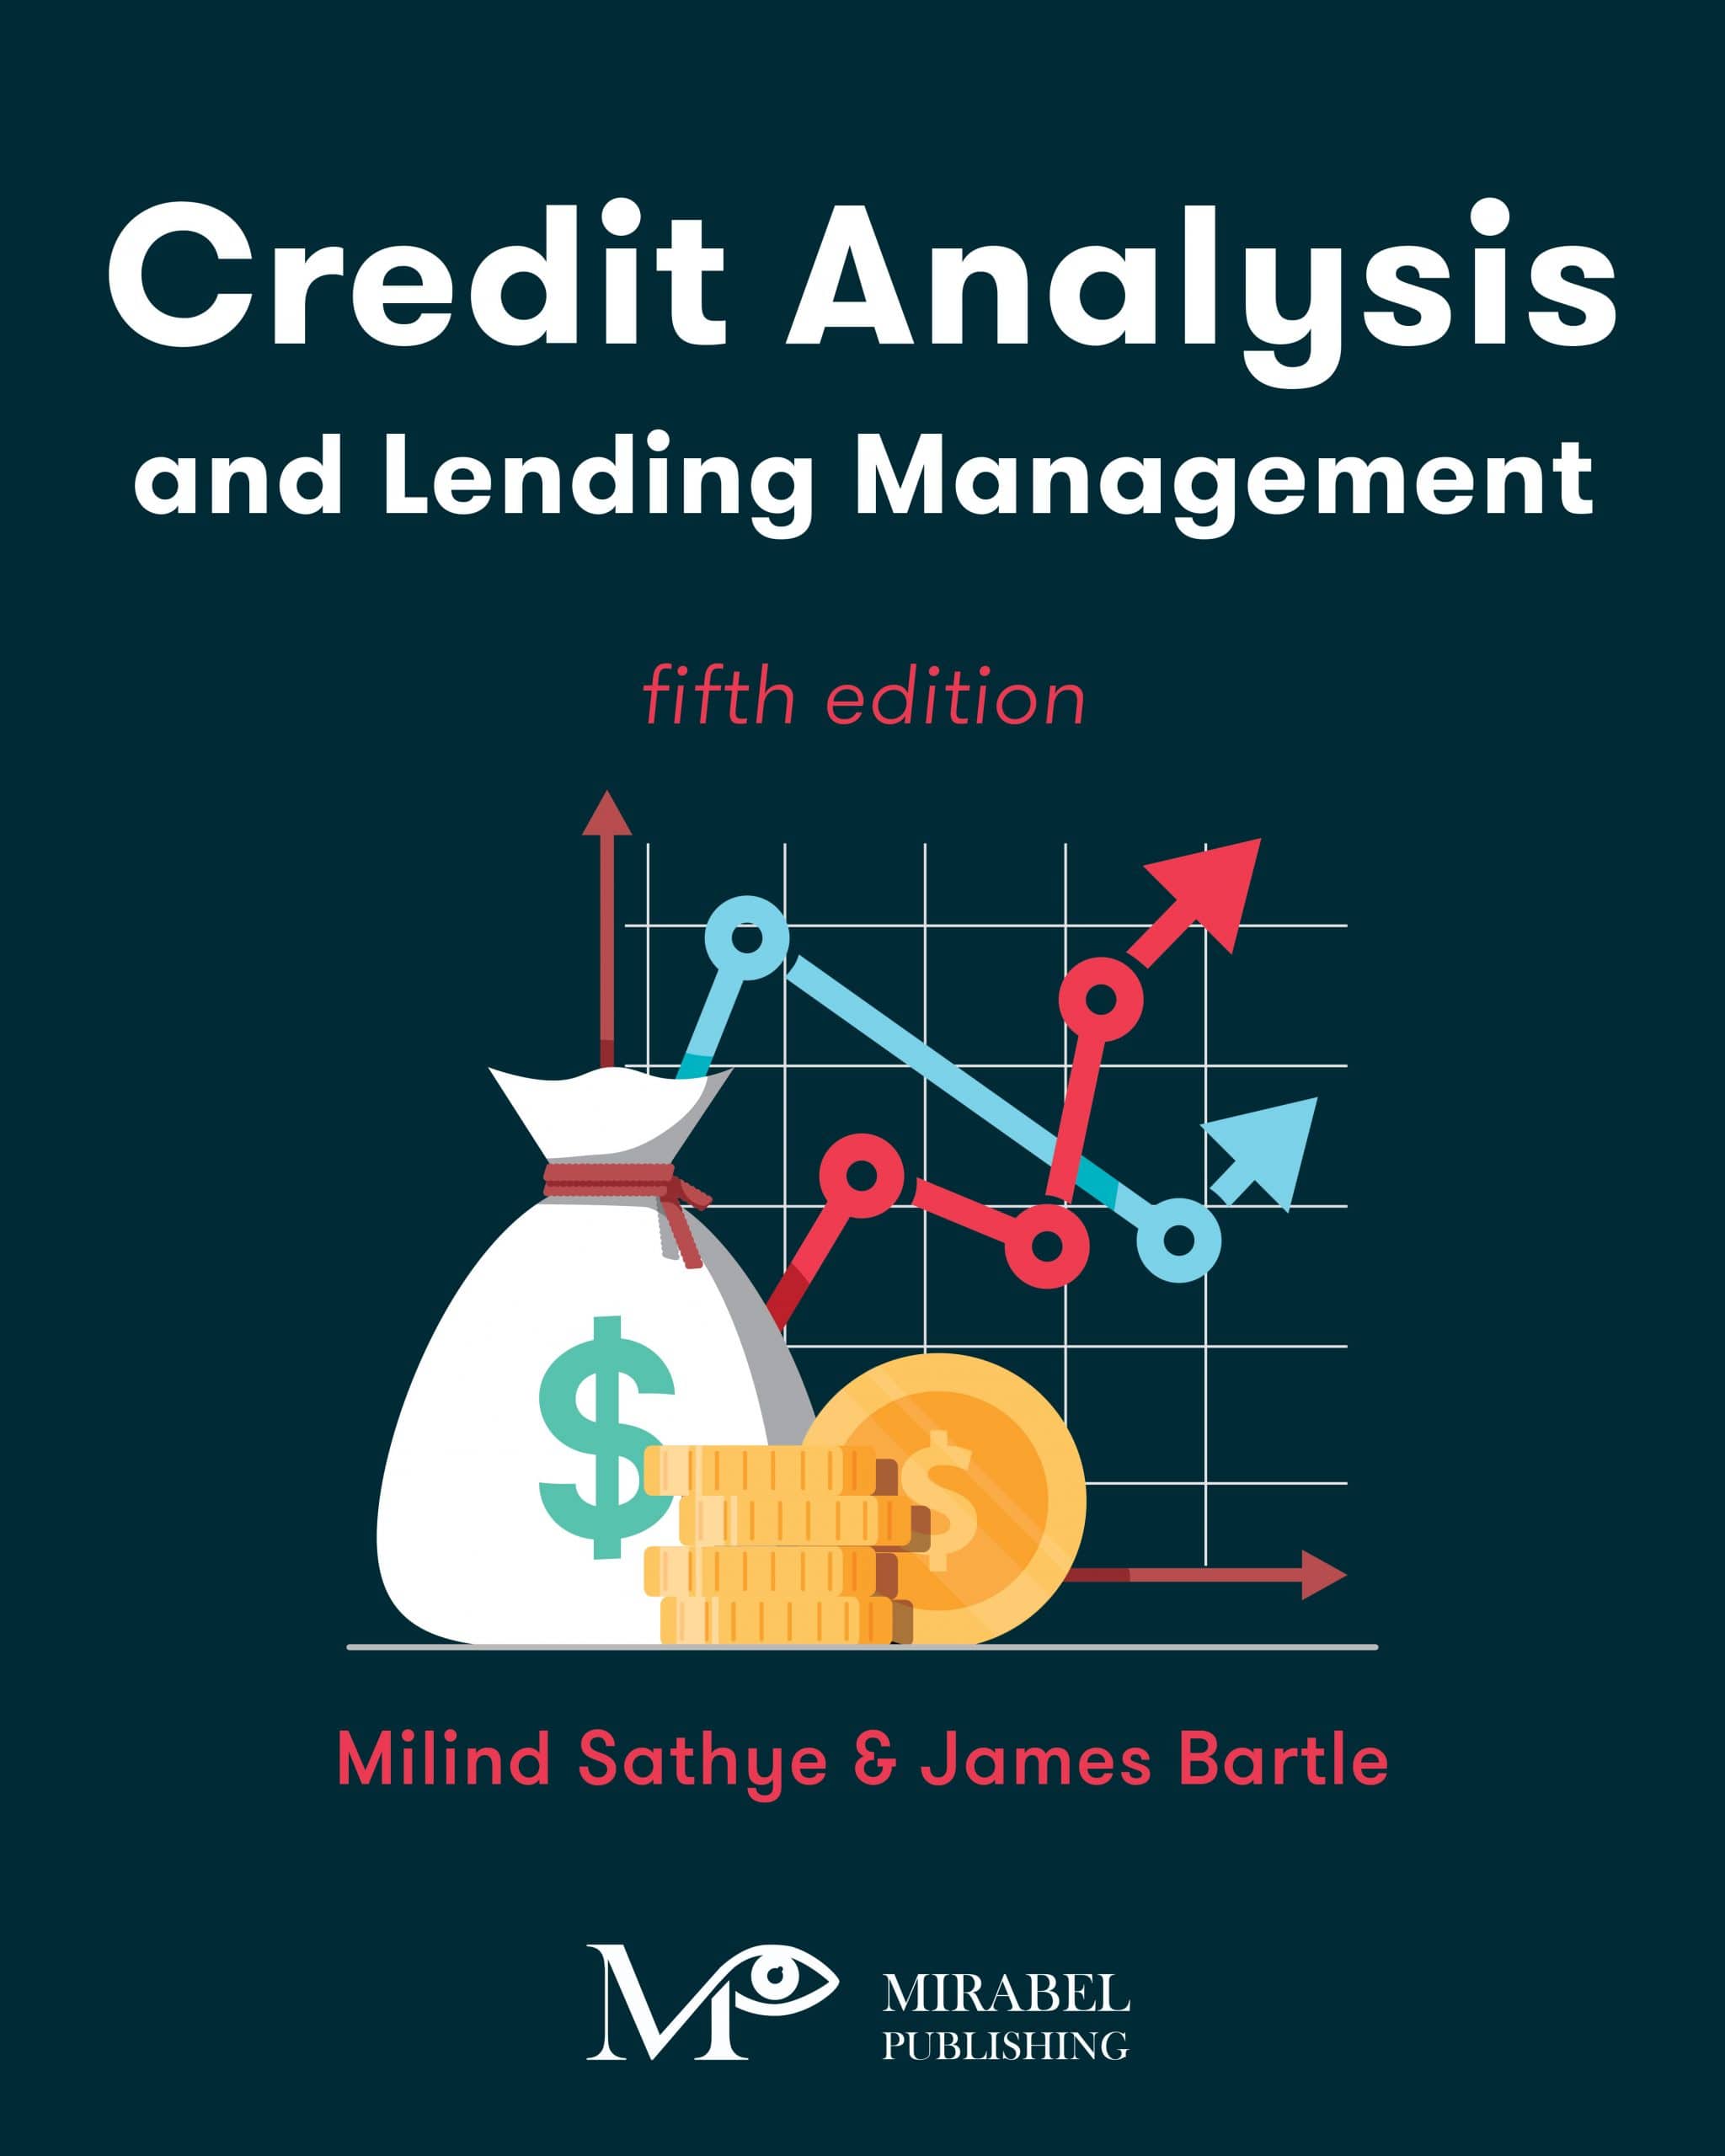 Credit Analysis and Lending Management (Fifth Edition)